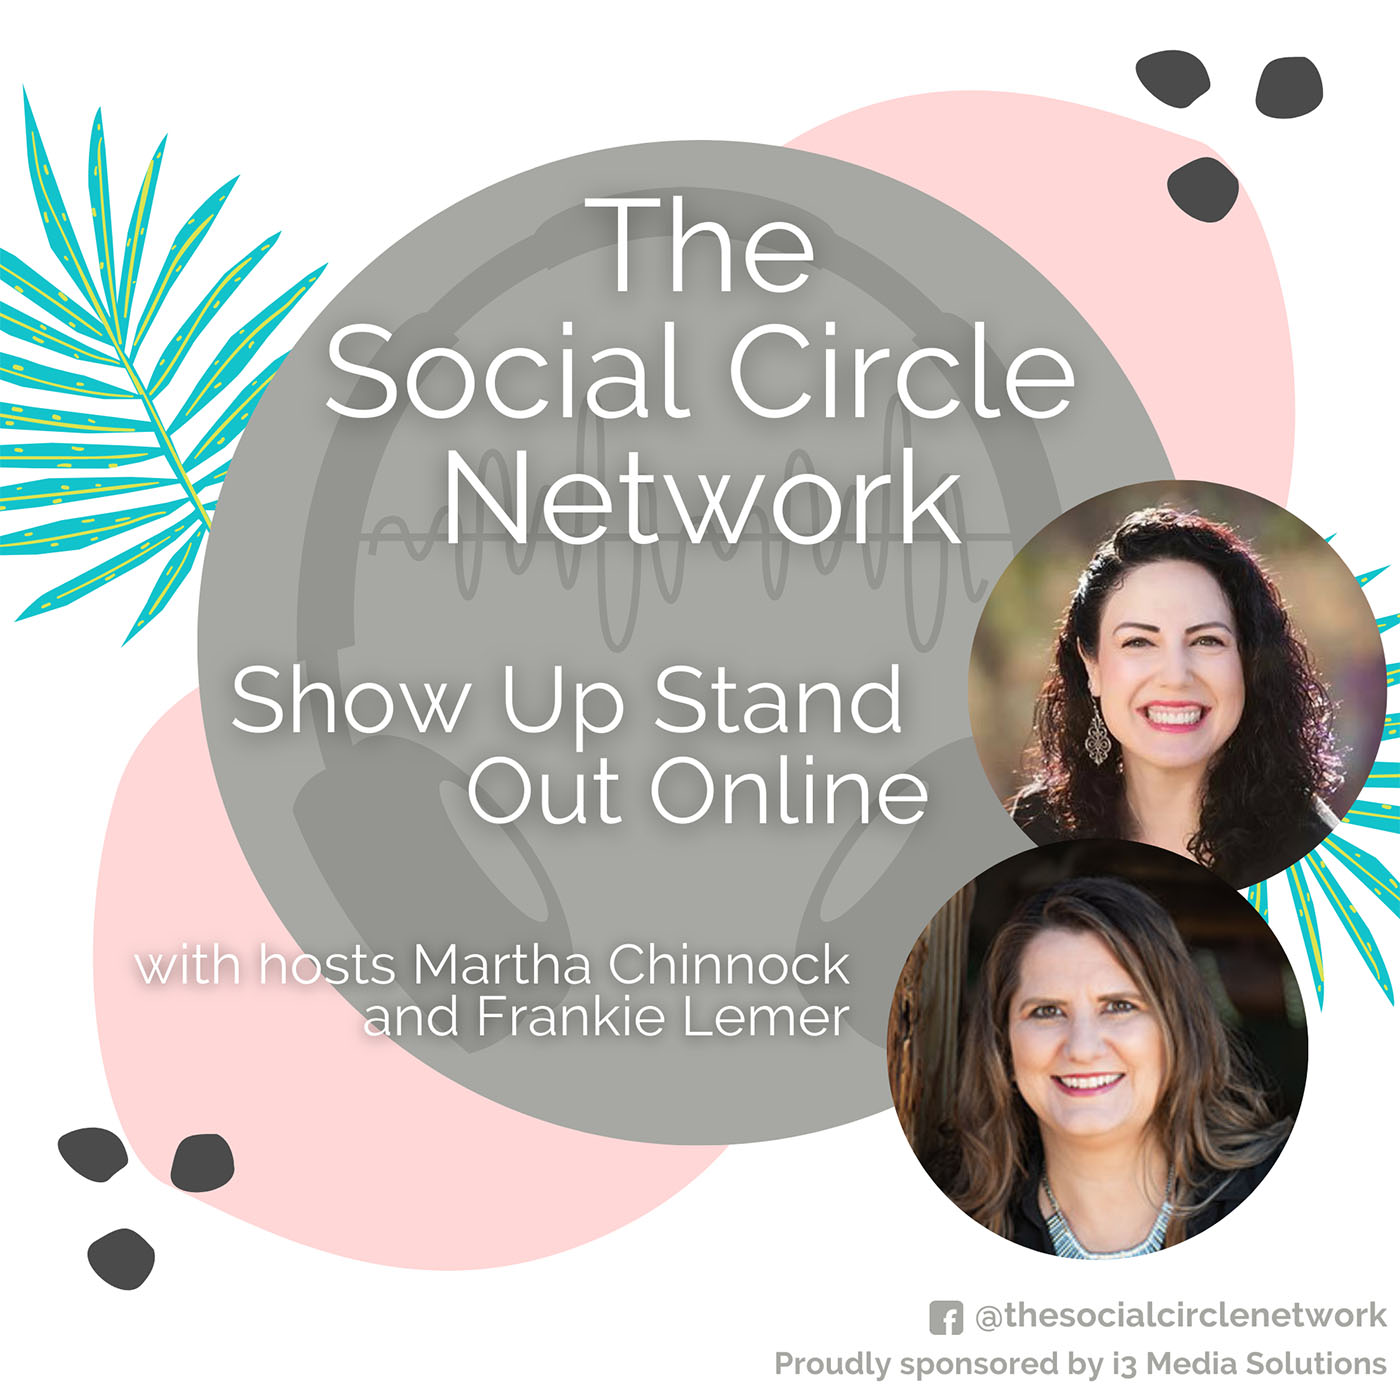 show up stand out the social circle network podcast episode with martha chinnock and frankie lemer image